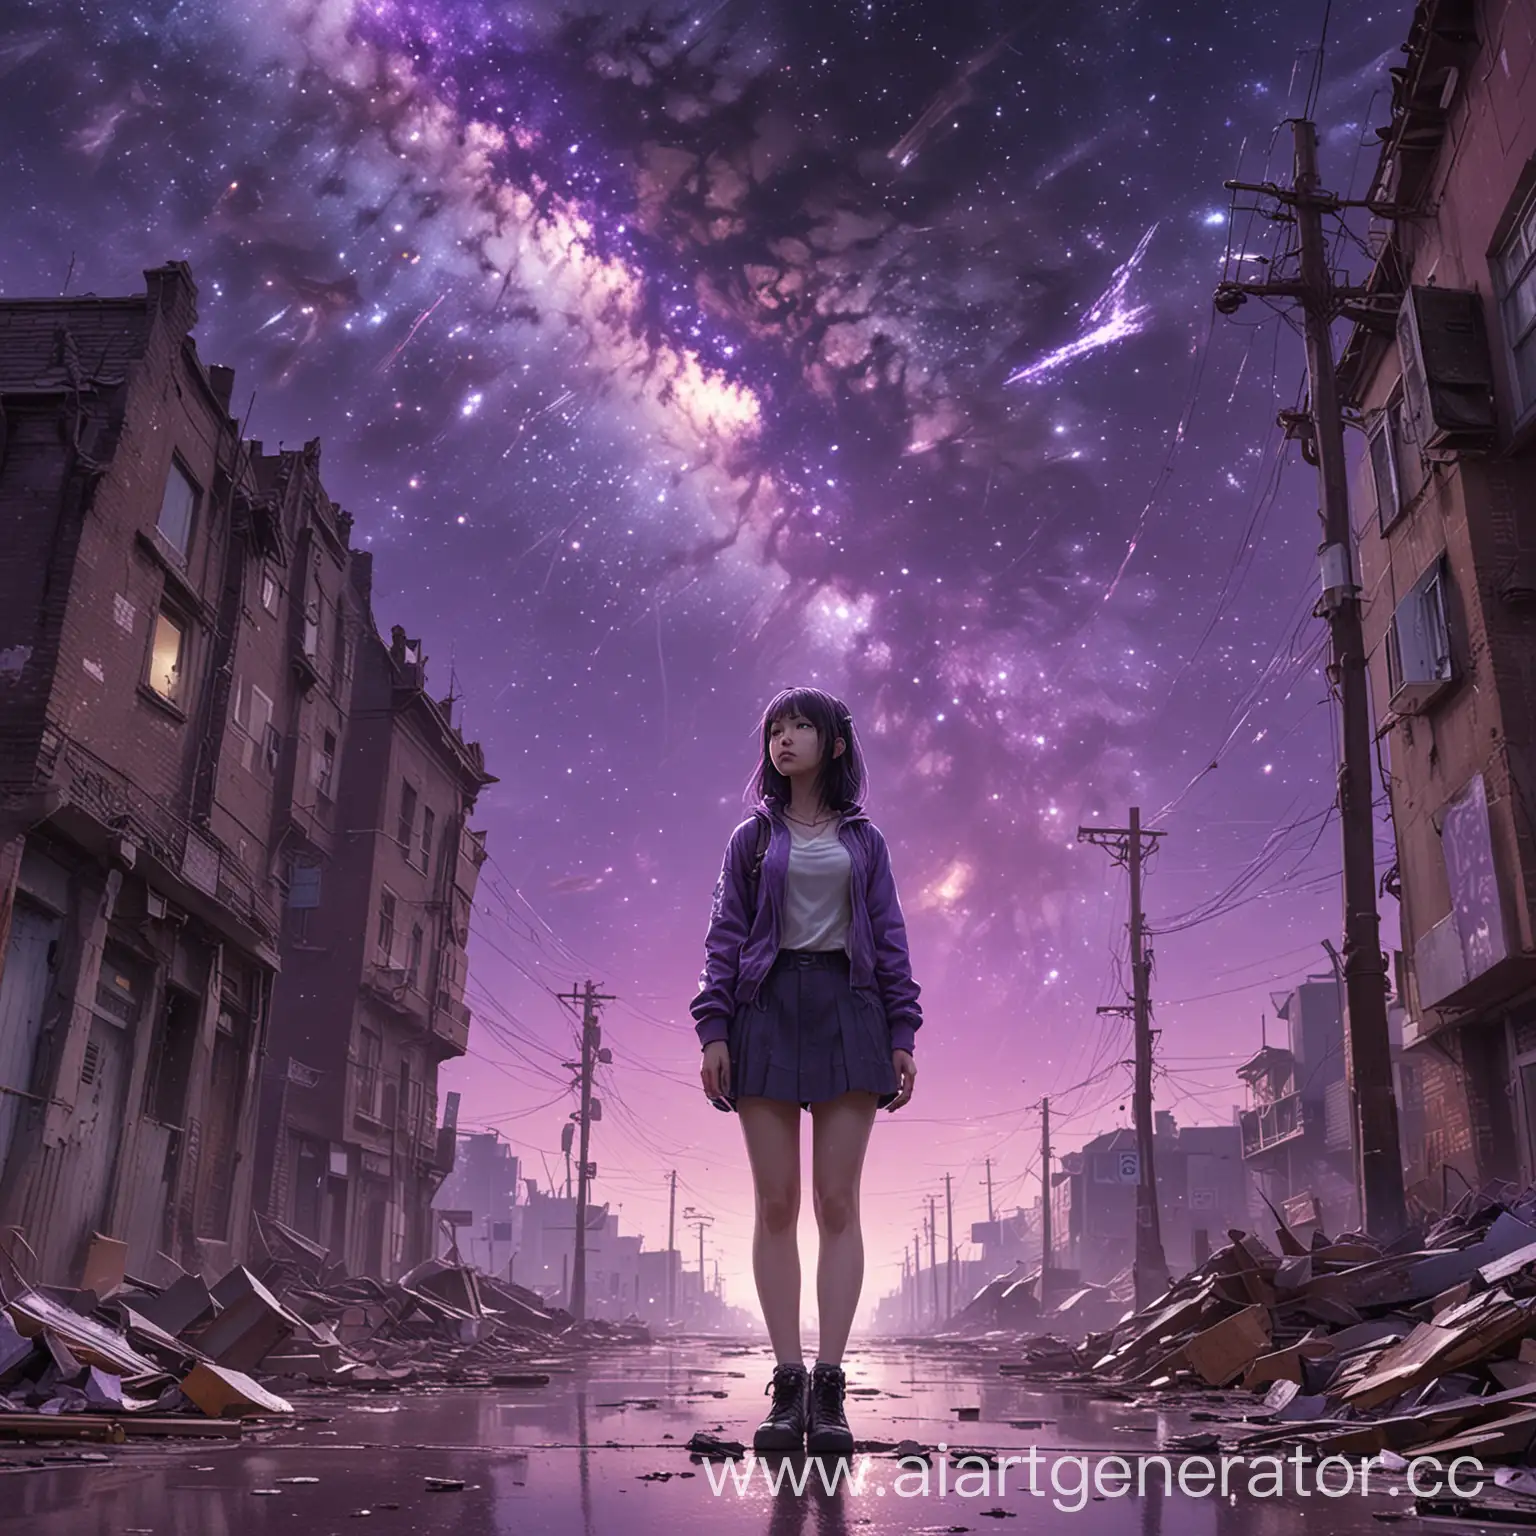 a woman standing in front of a purple background, artwork in the style of. ‘guweiz, character album cover, wrecked technology, the sky has the milky way, anxious steward of a new castle, the diskworid, breakcore, warmly Ii, sidewalk, runic words, toko fukawa